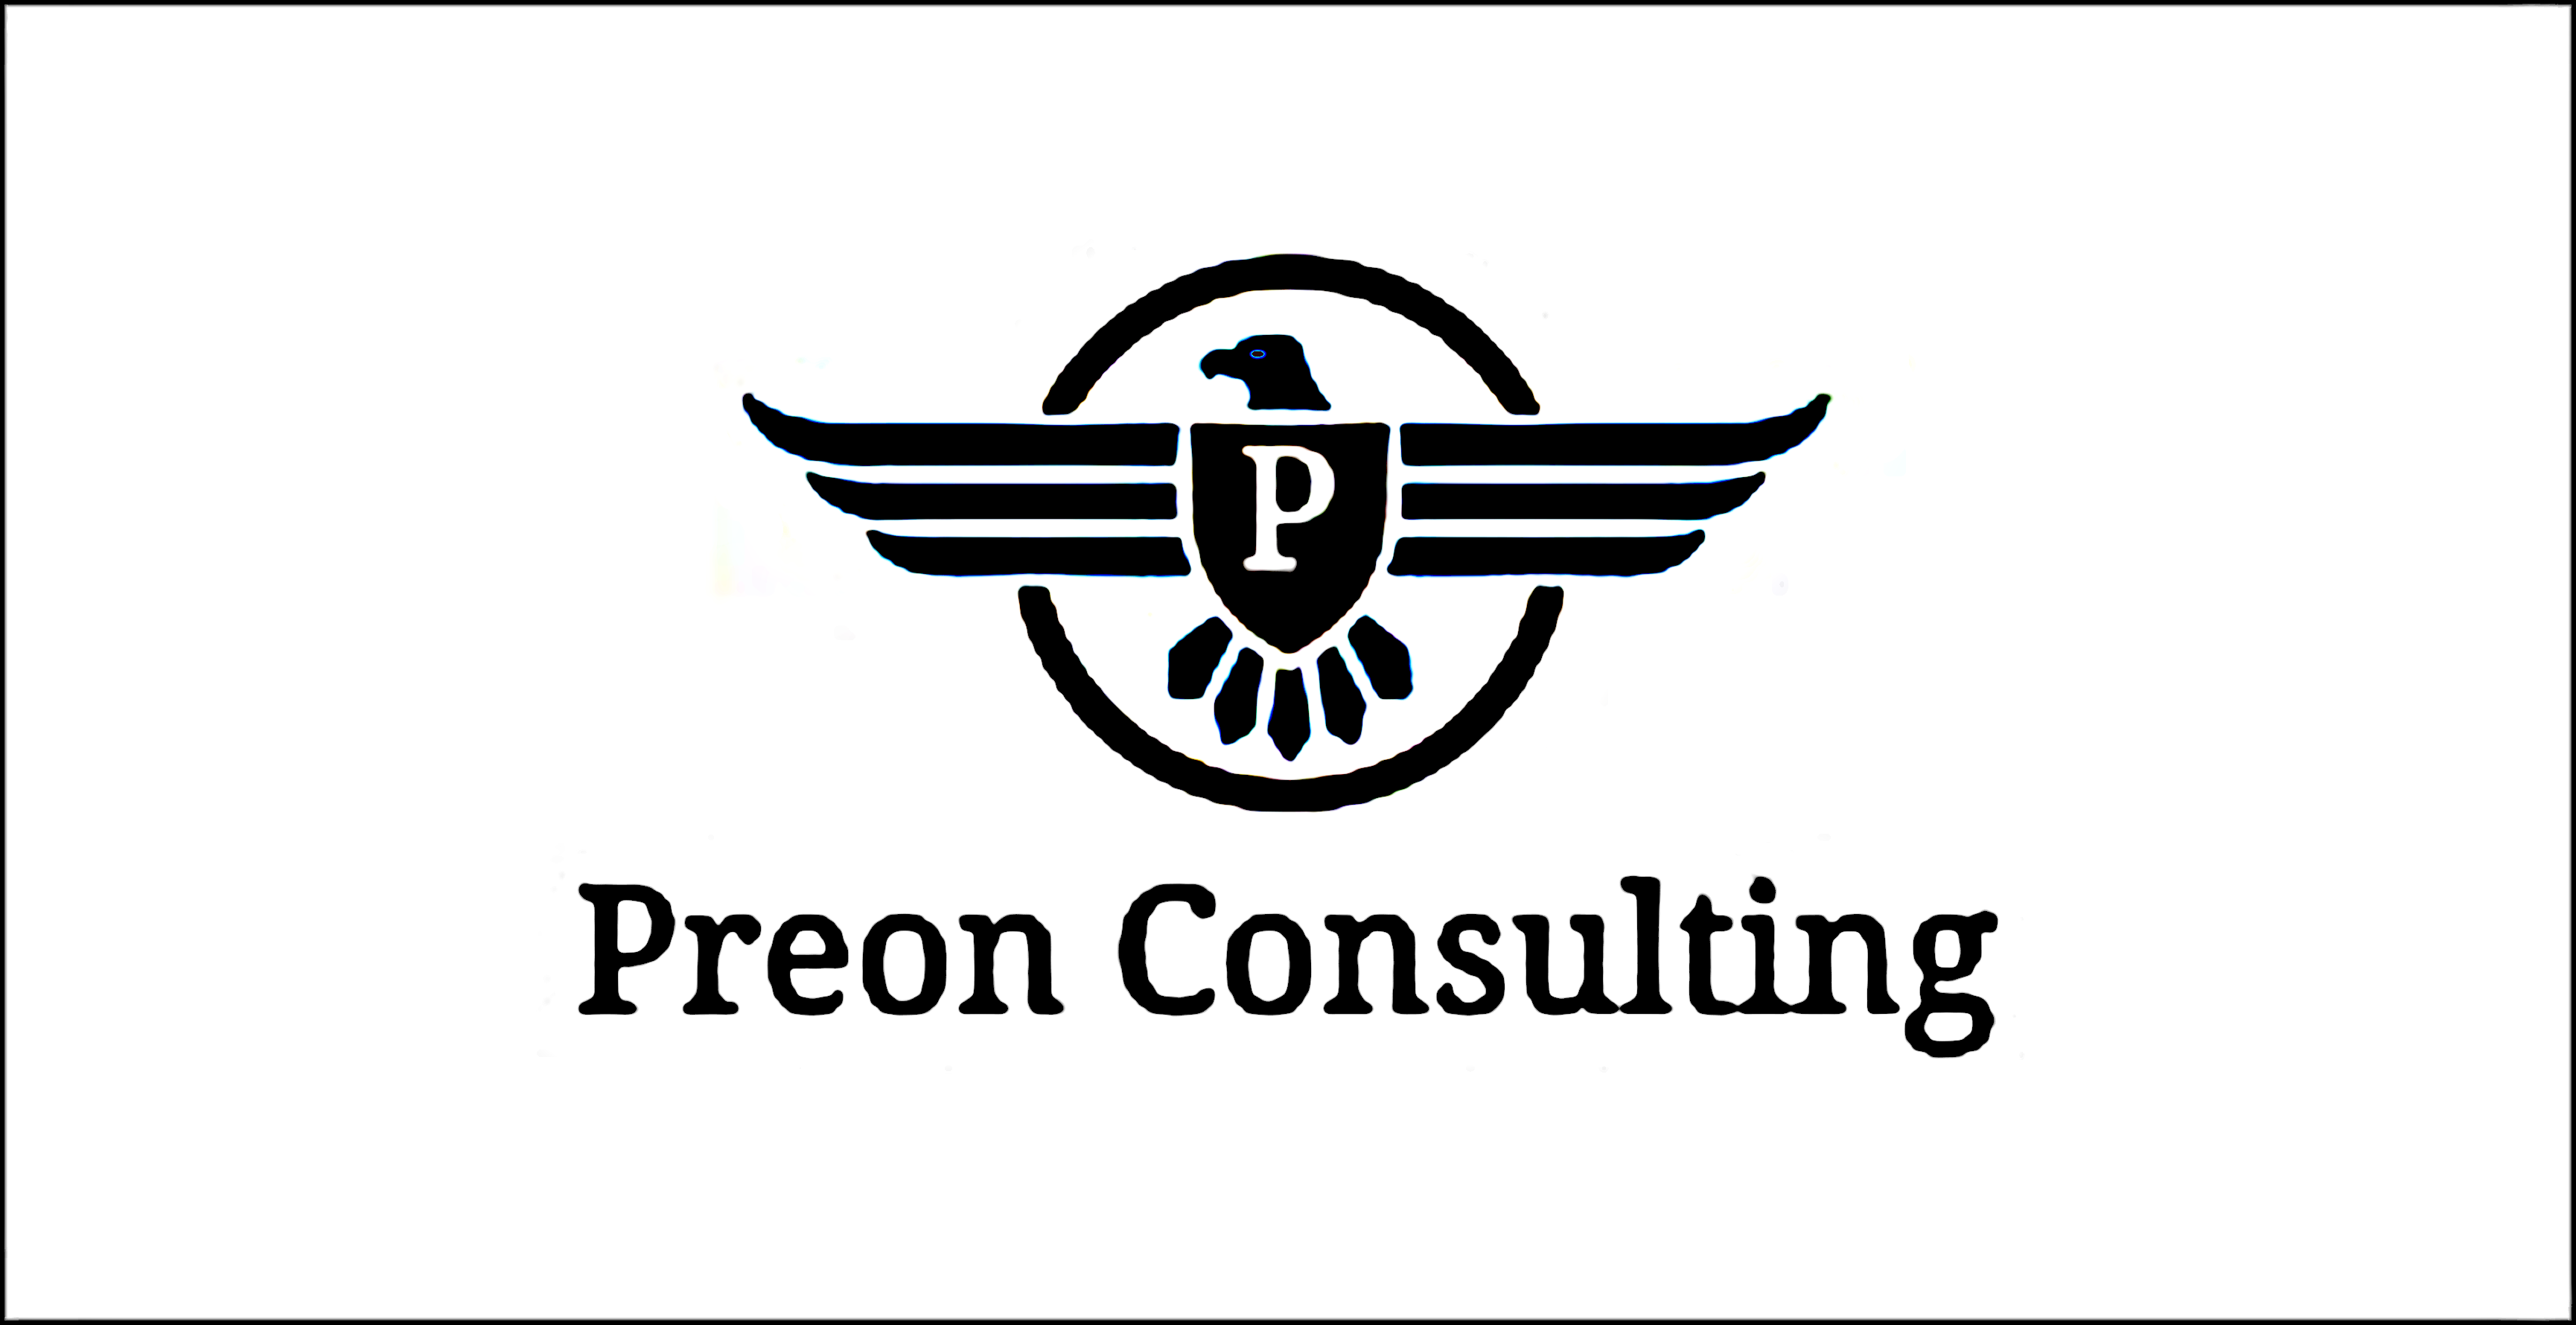 Welcome to Preon Consulting